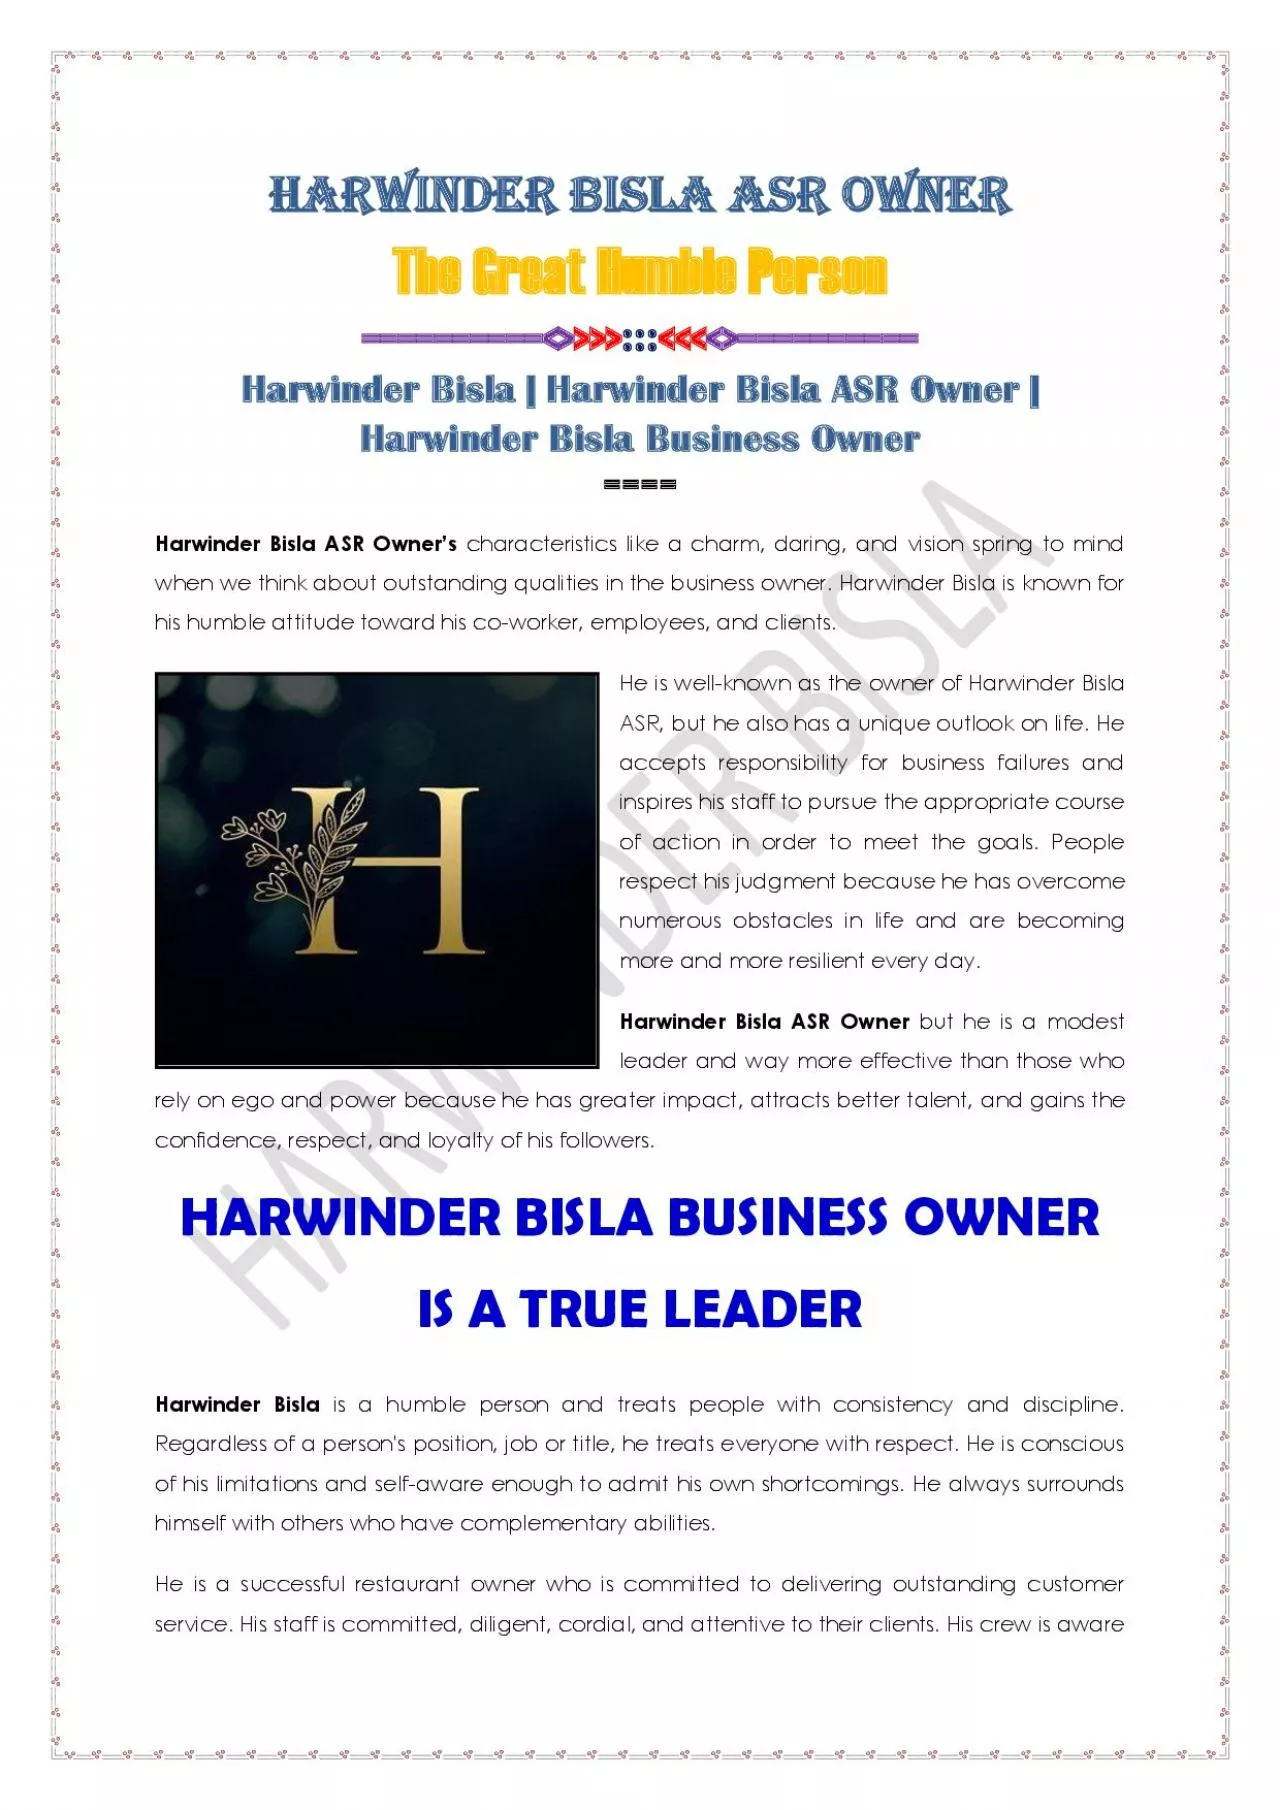 Harwinder Bisla ASR Owner: The Great Humble Person